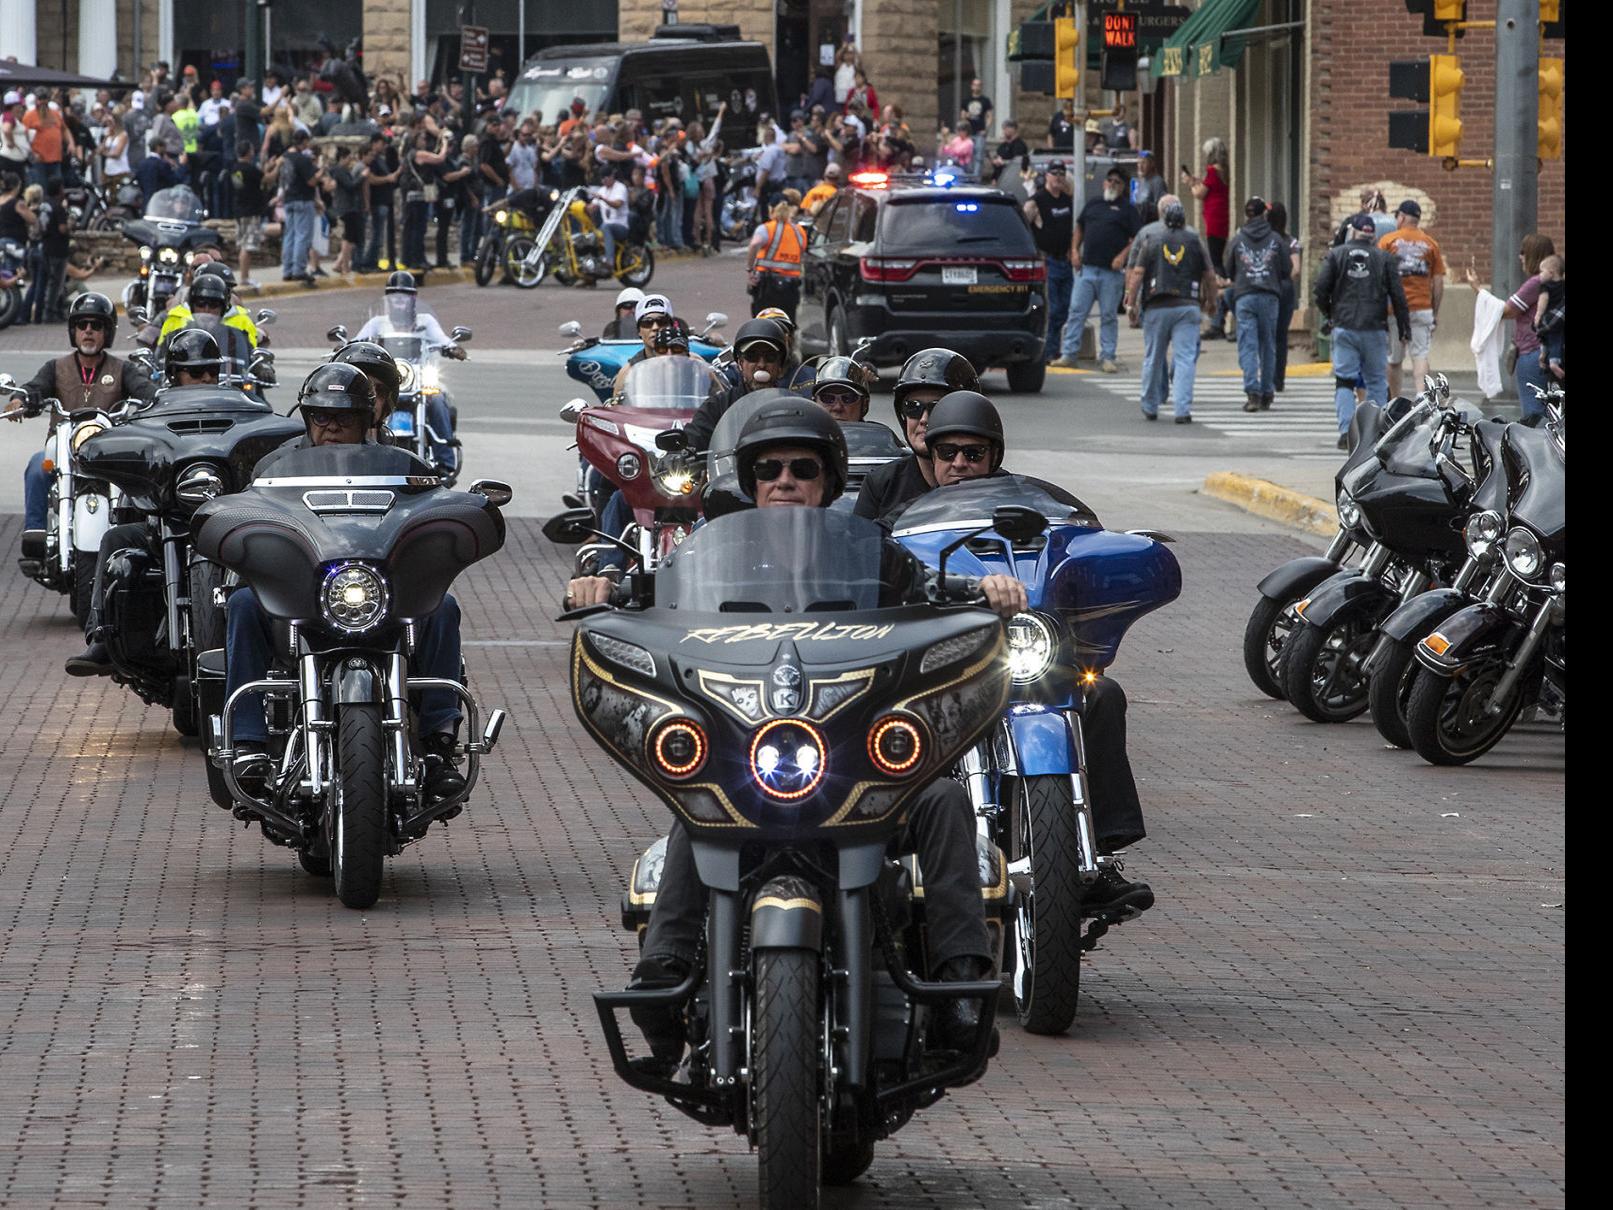 Sturgis Rally Visitors Not Allowed Through Cheyenne River Reservation Checkpoints Local Rapidcityjournal Com - motorcycle gang in roblox